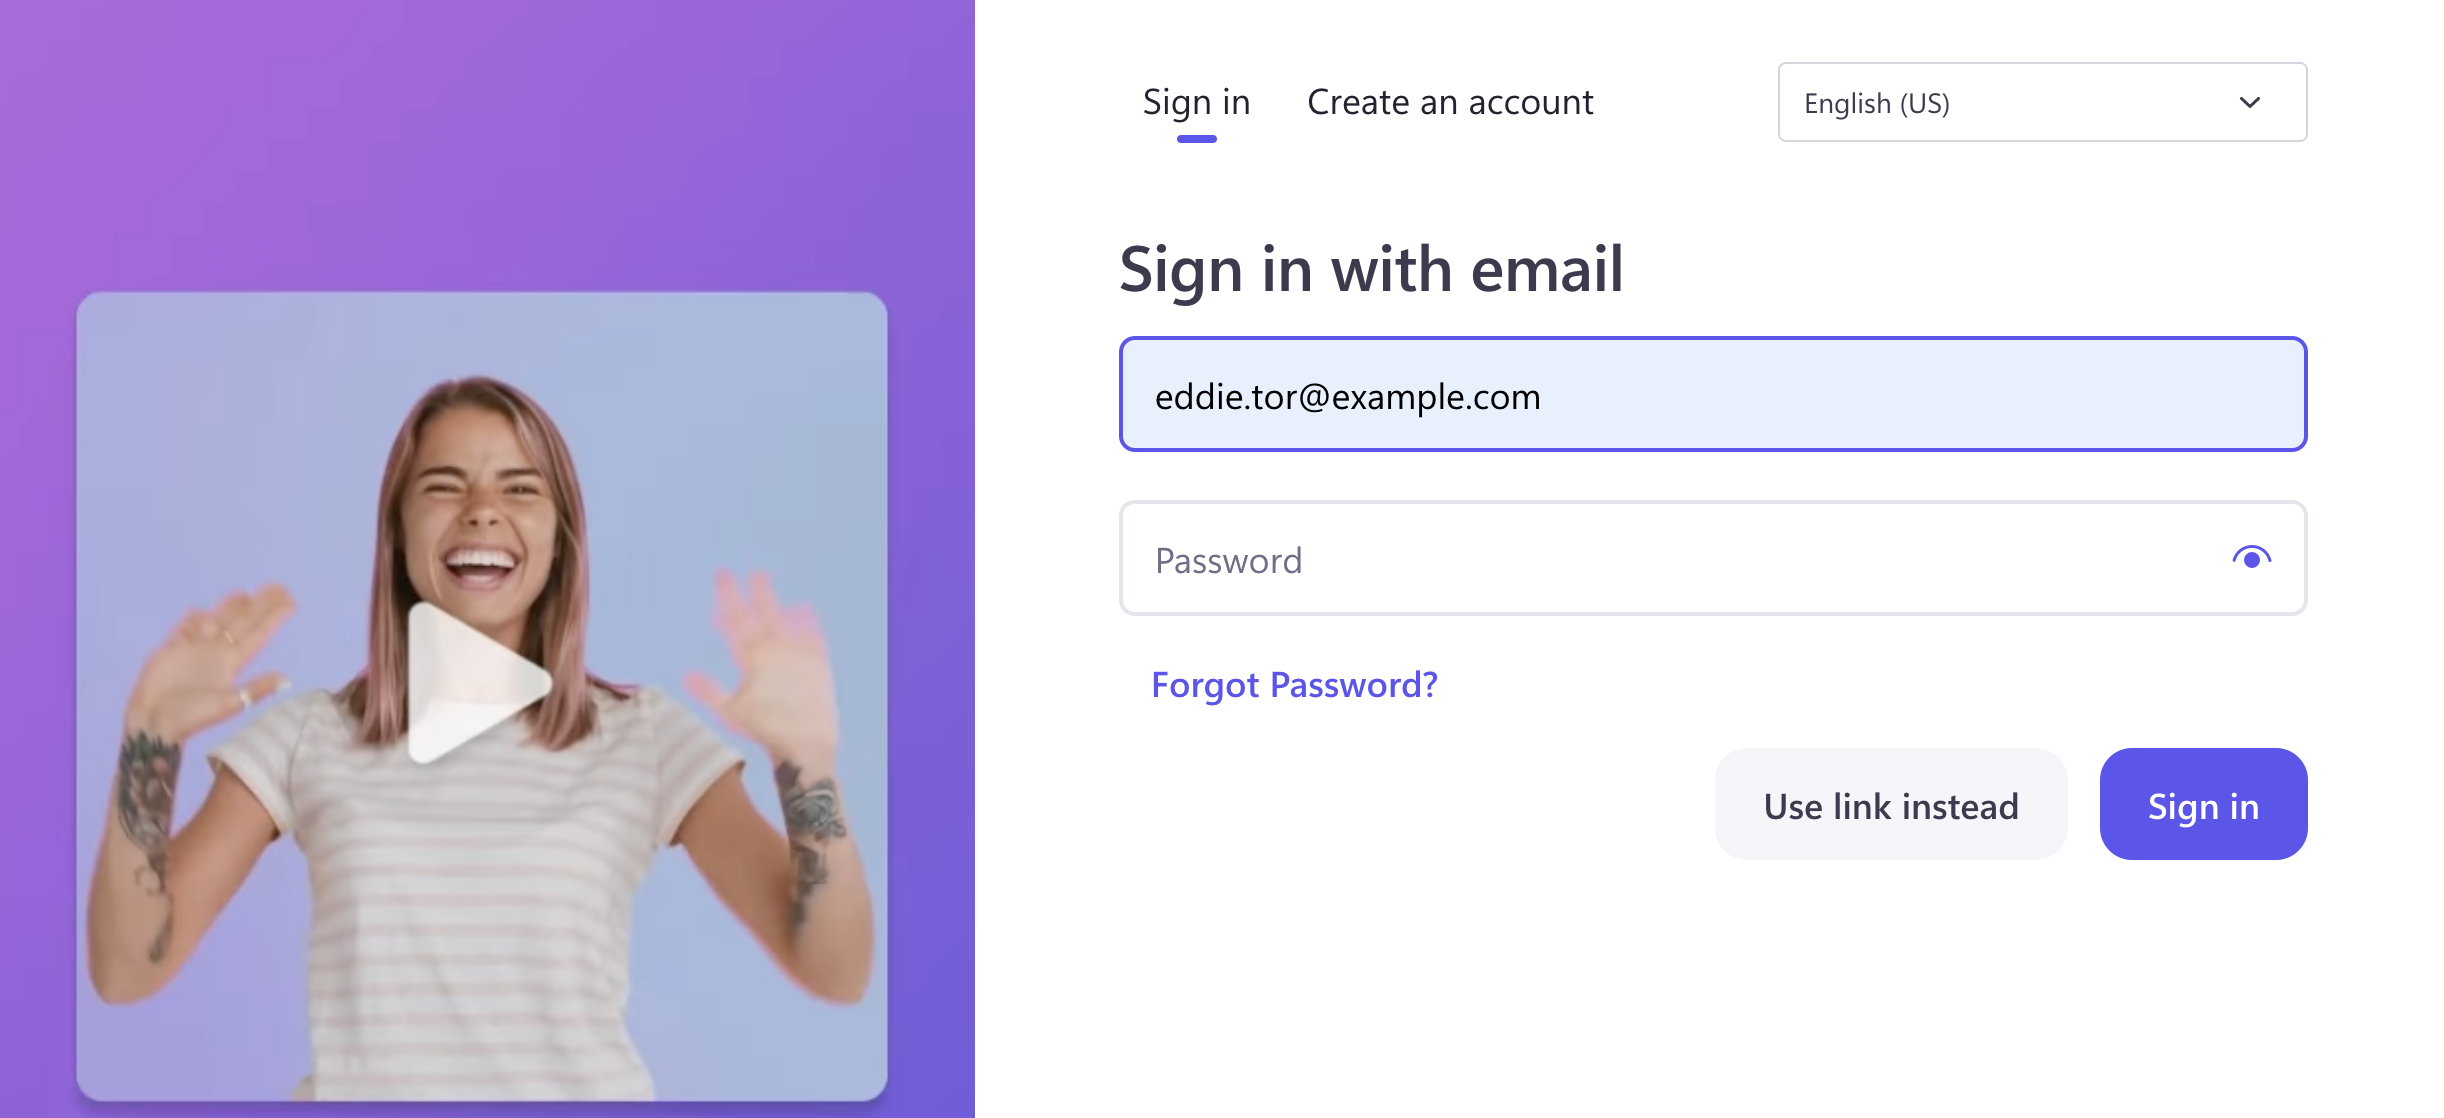 An image of a user signing in with an email.